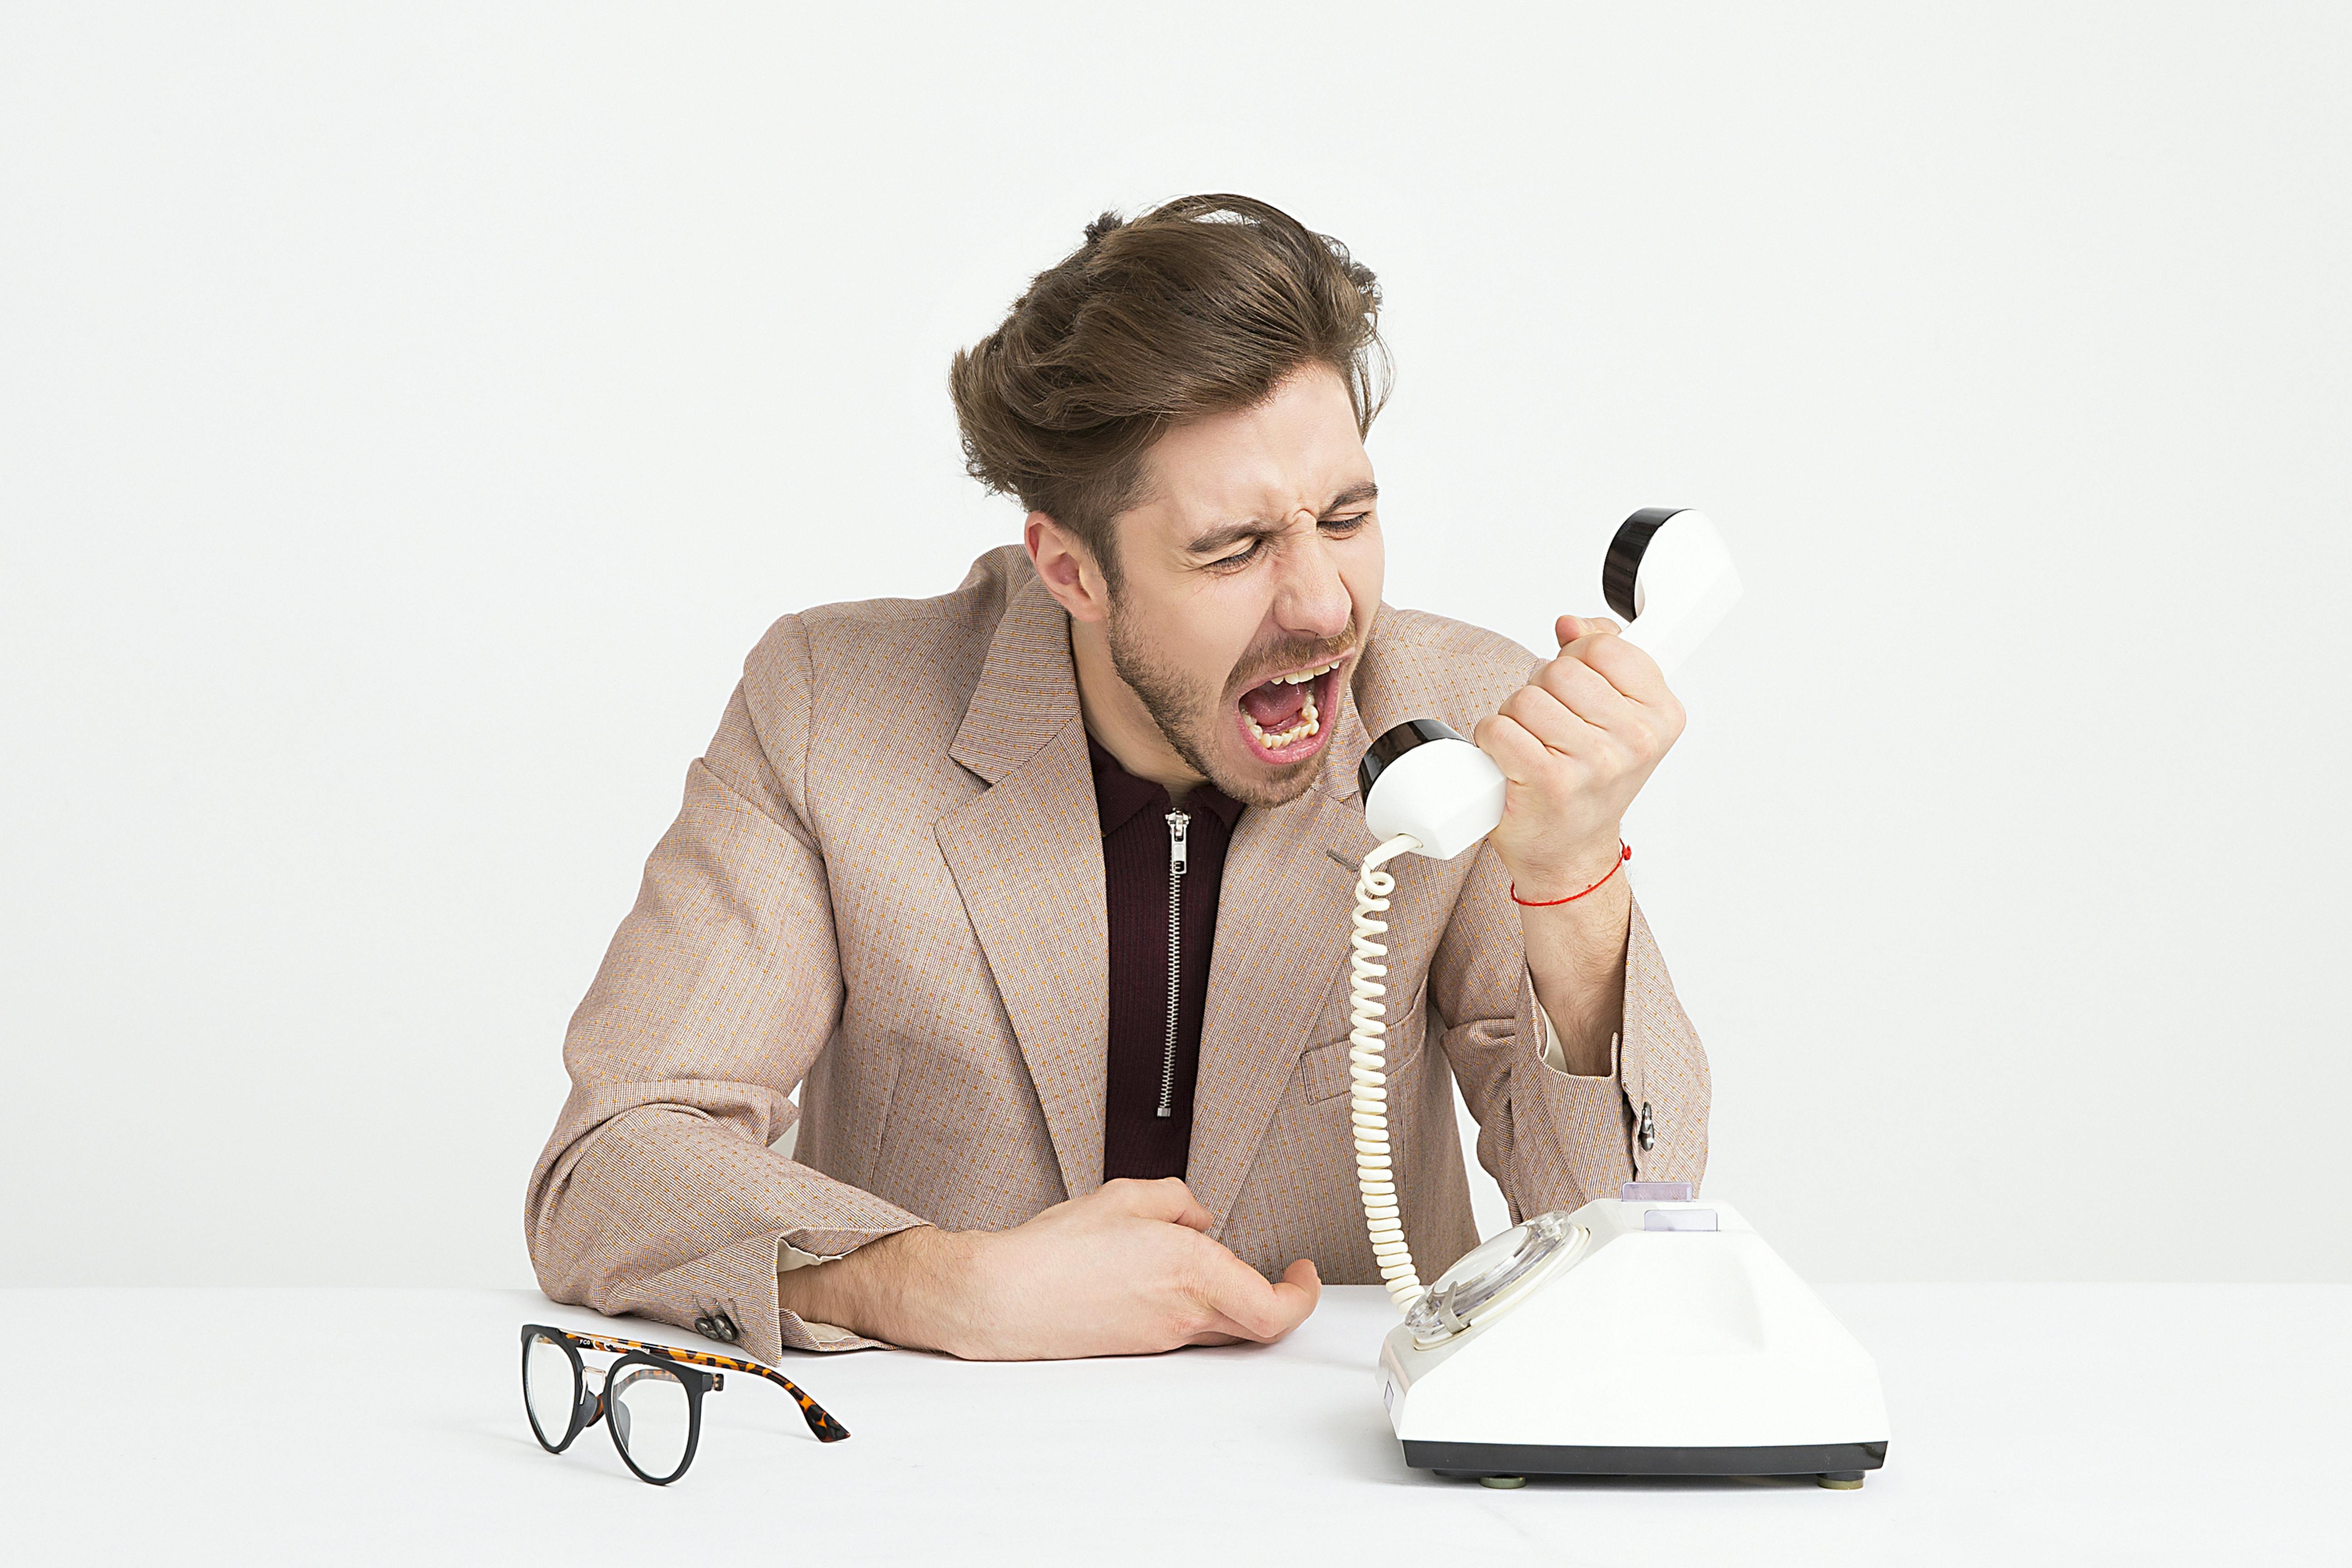 A person yelling into a phone.